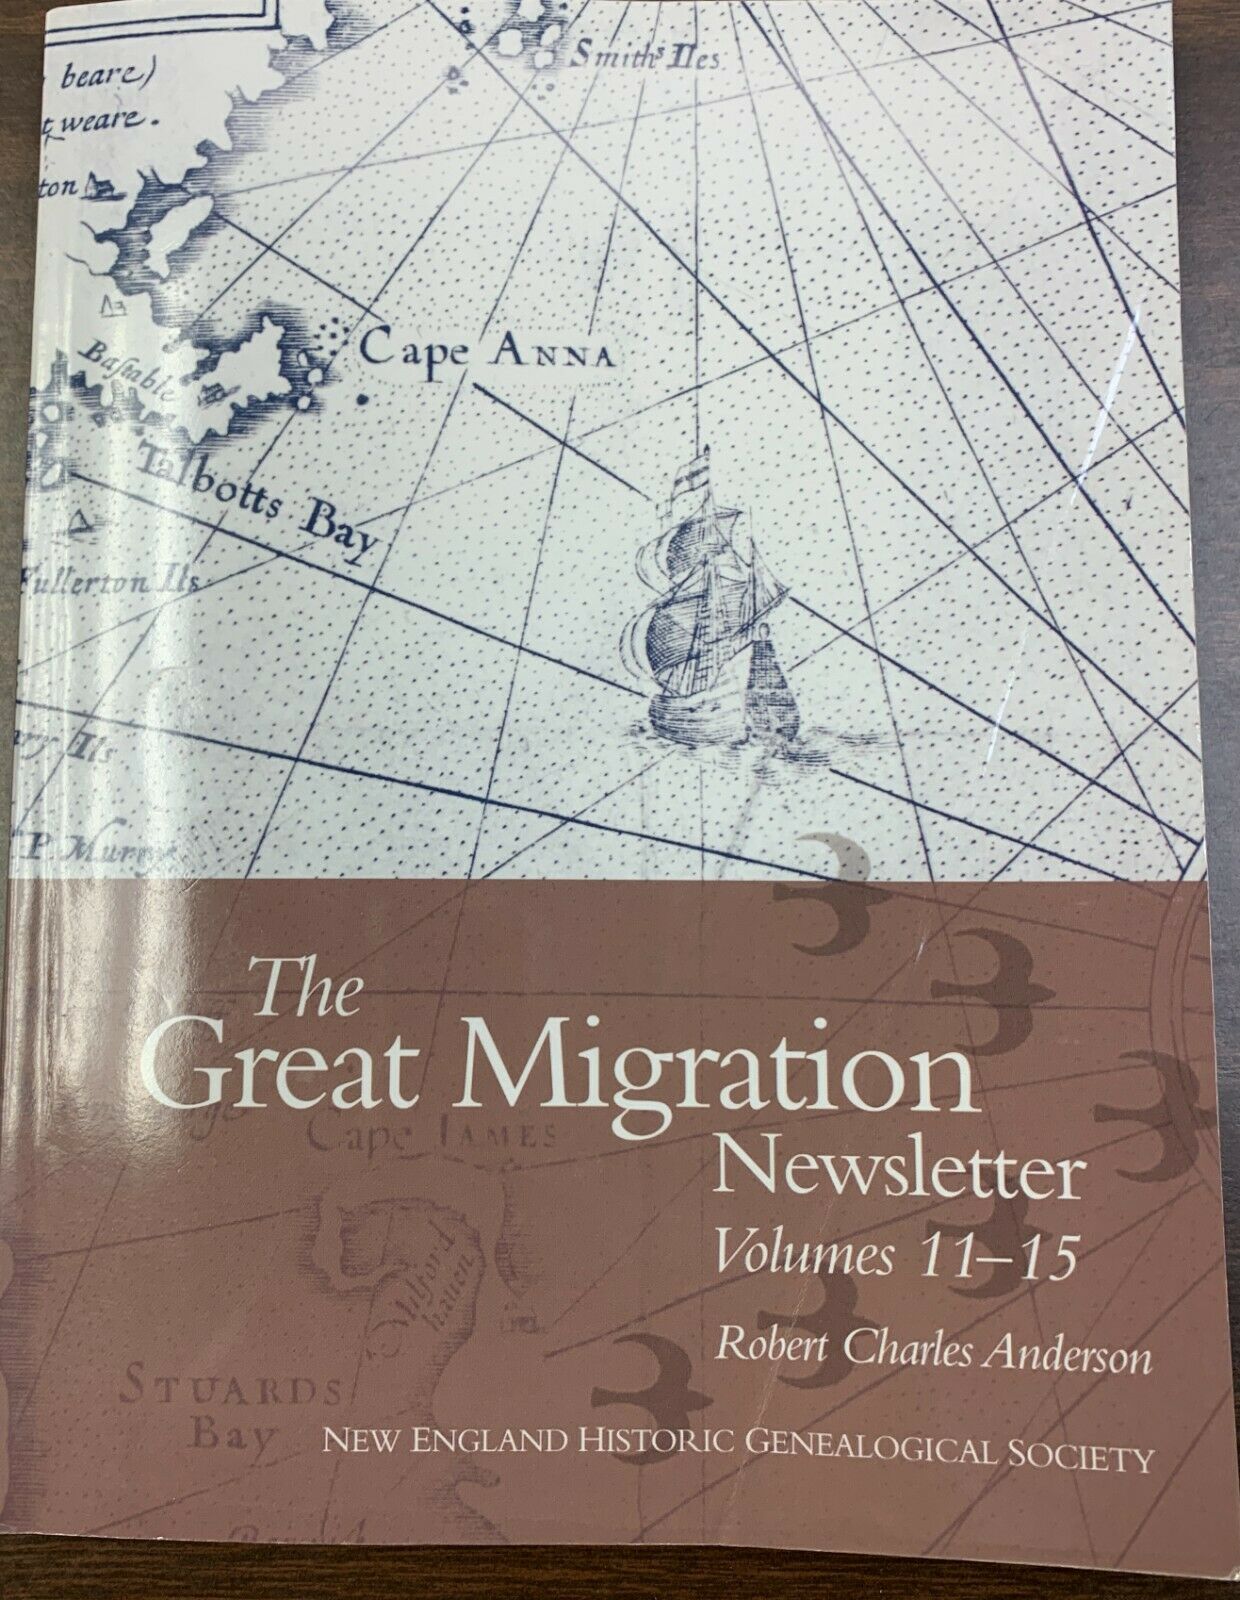 The Great Migration Newsletter Volumes 11-15 (2002-2006)